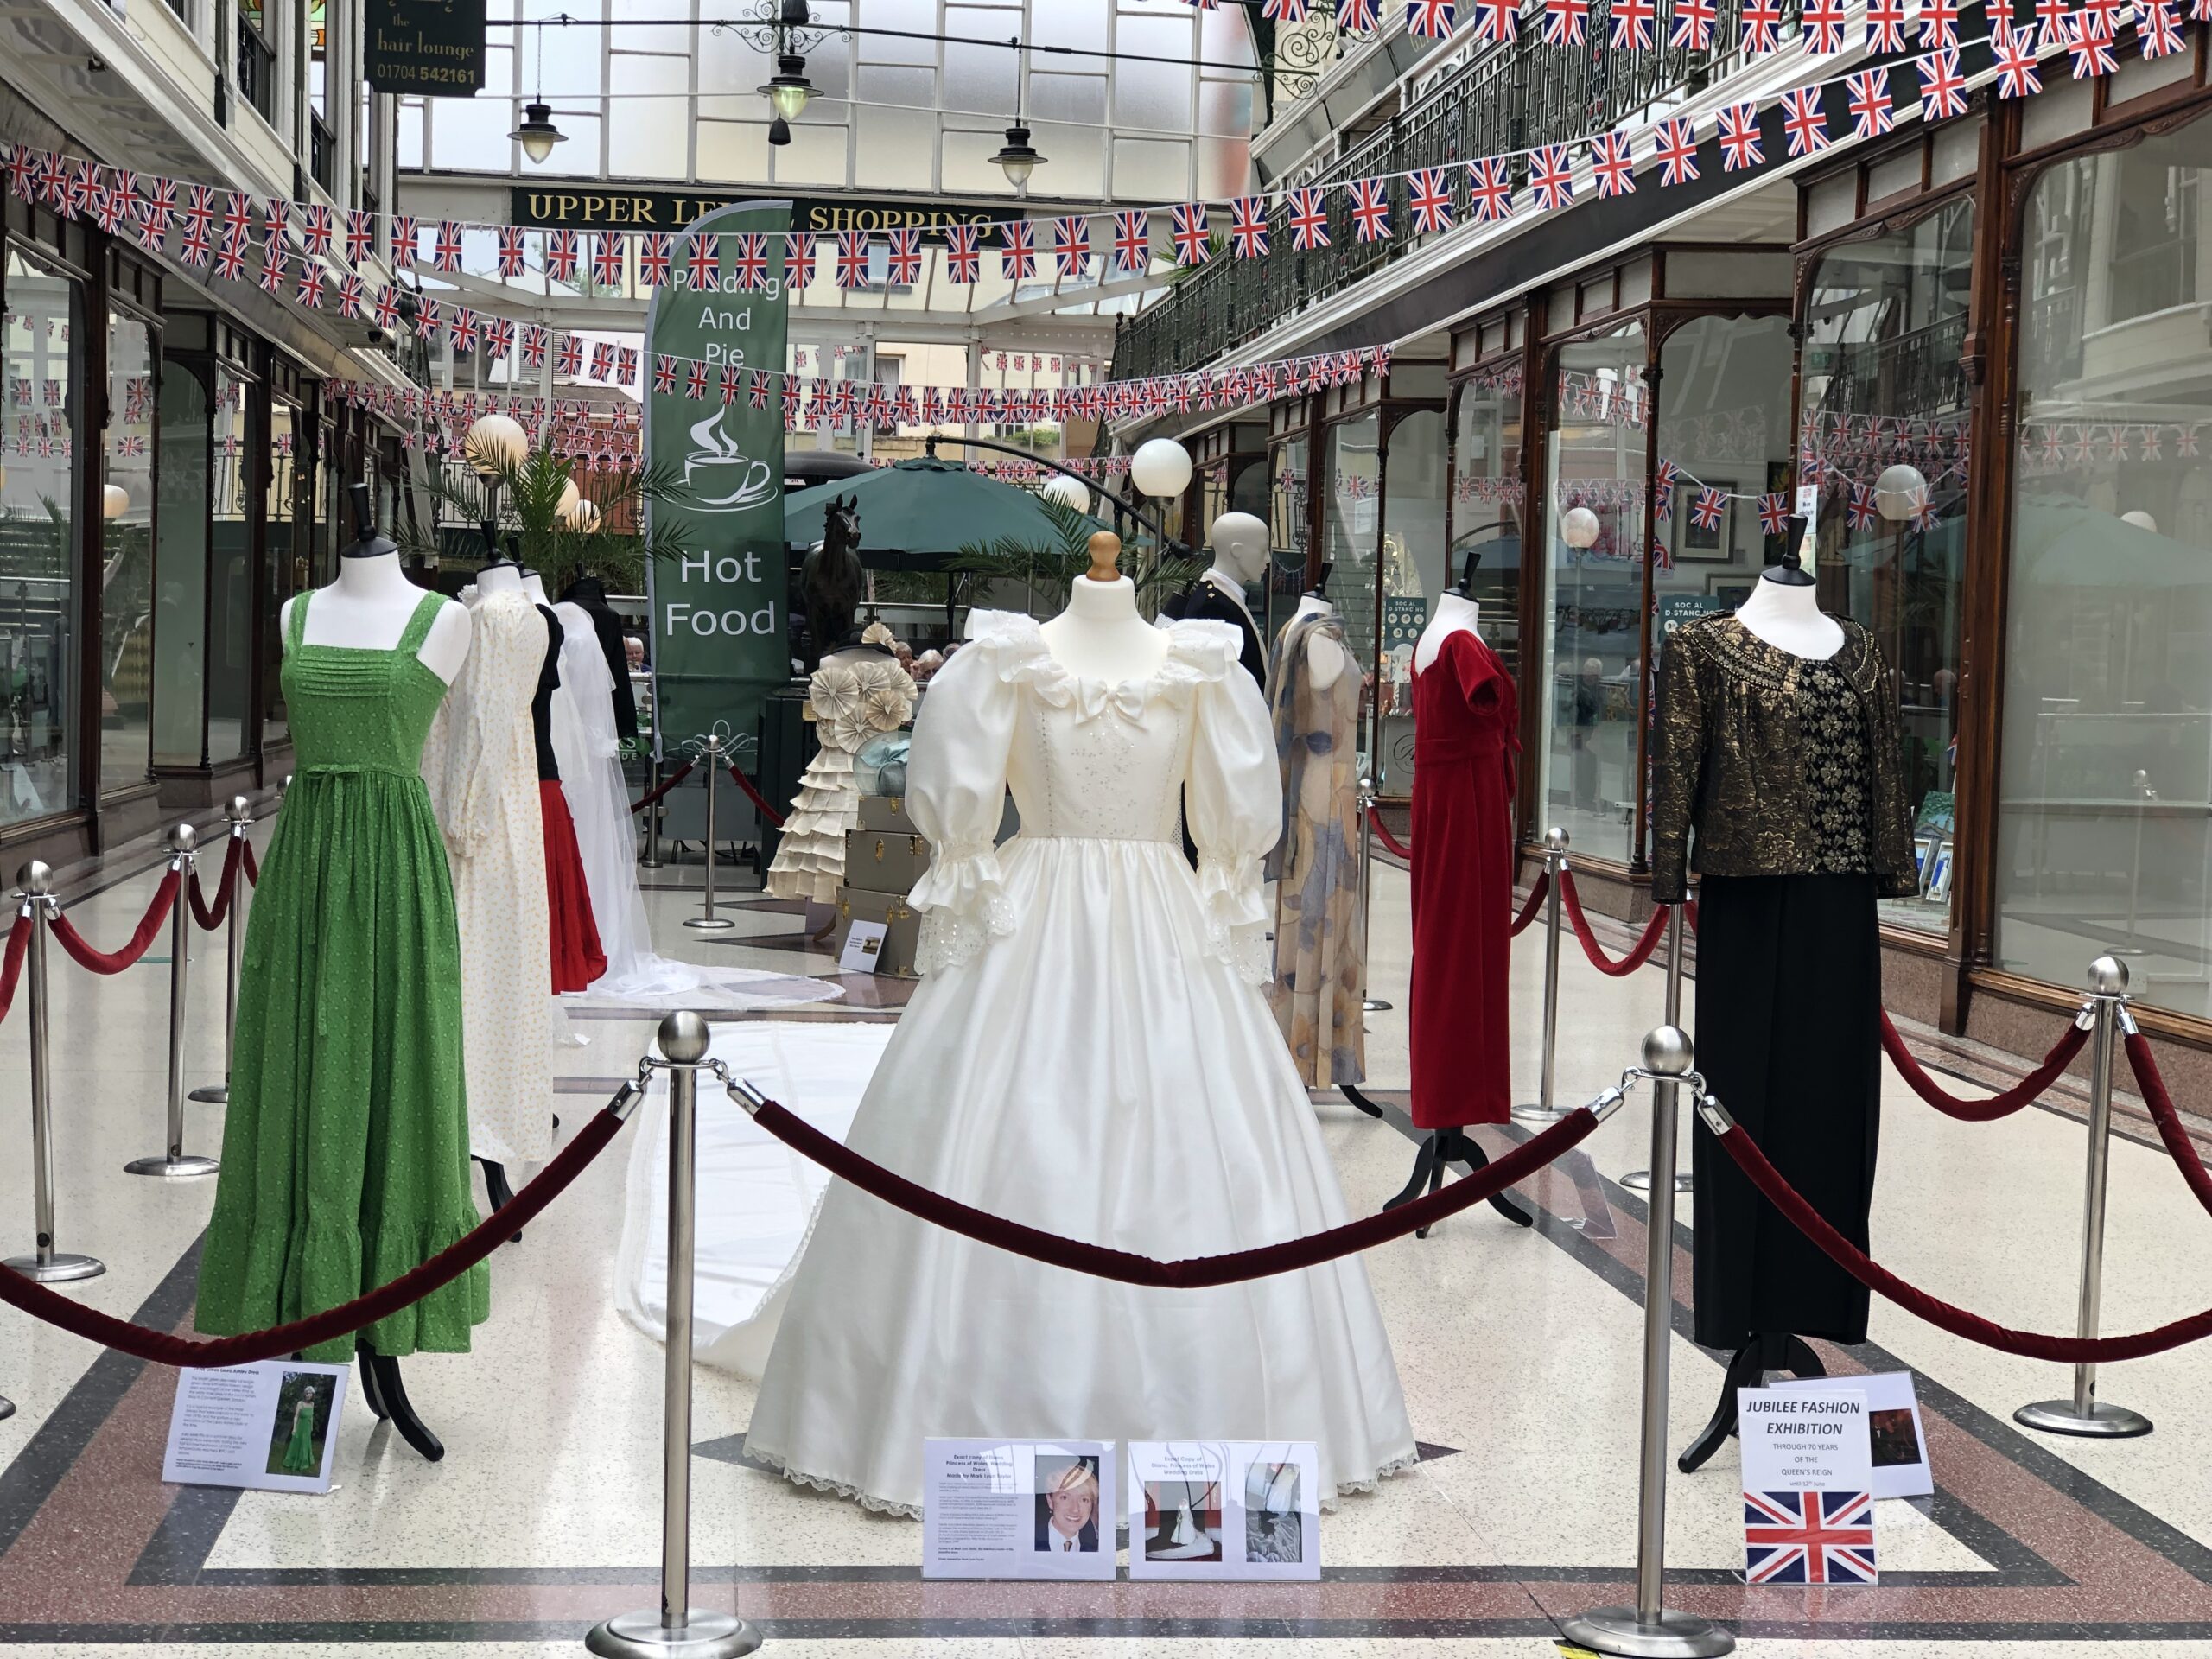 Wayfarers Arcade in Southport town centre has announced the centrepiece of its Jubilee Fashion Exhibition is to be an exact copy of Diana Princess of Wales wedding dress when she married Prince Charles on 29 July 1981